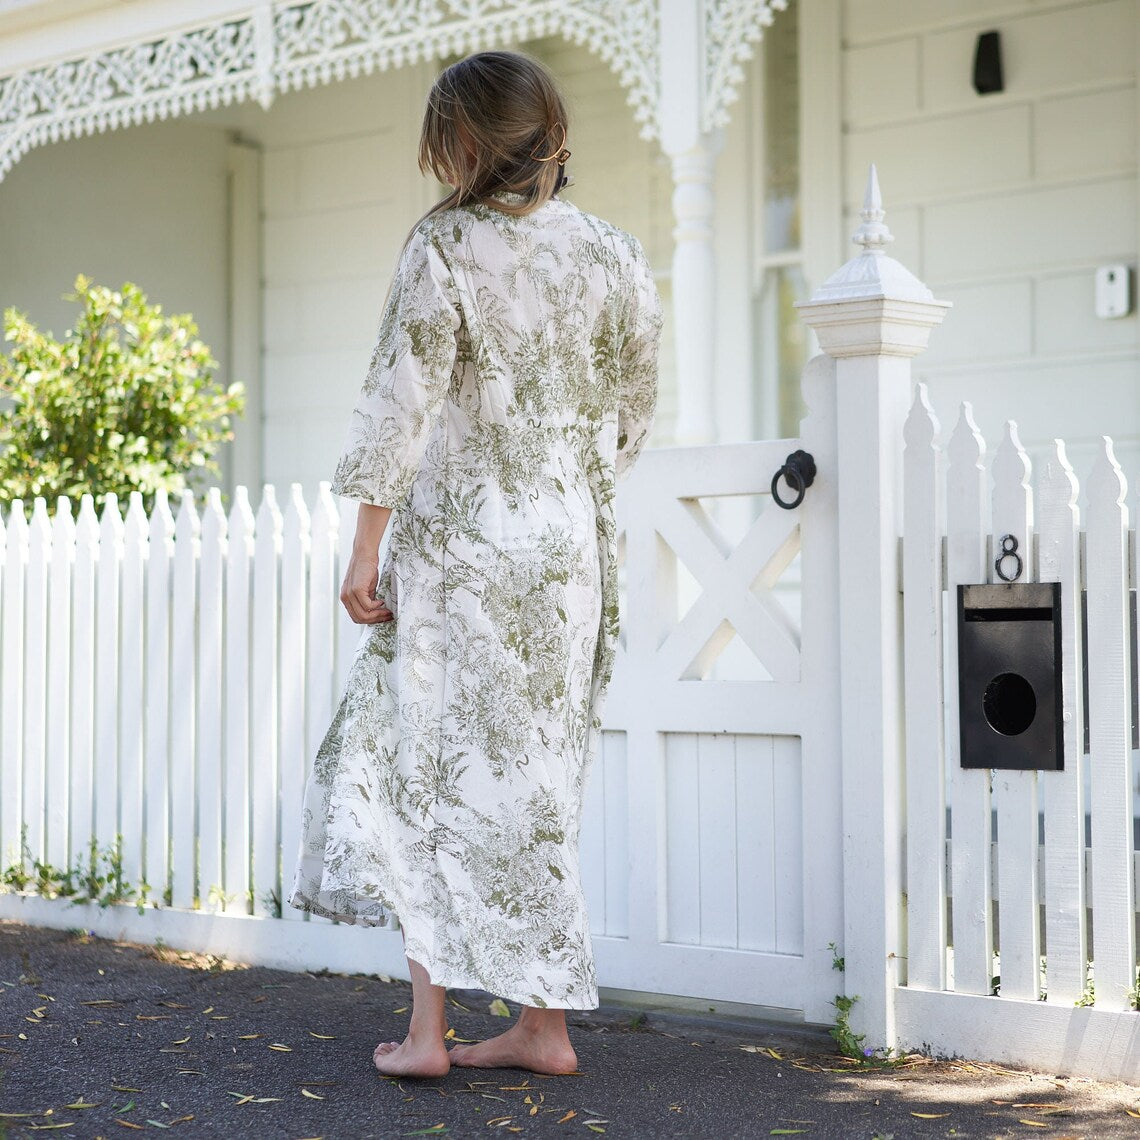 'Timeless Tranquility' 100% Cotton Maxi Dress